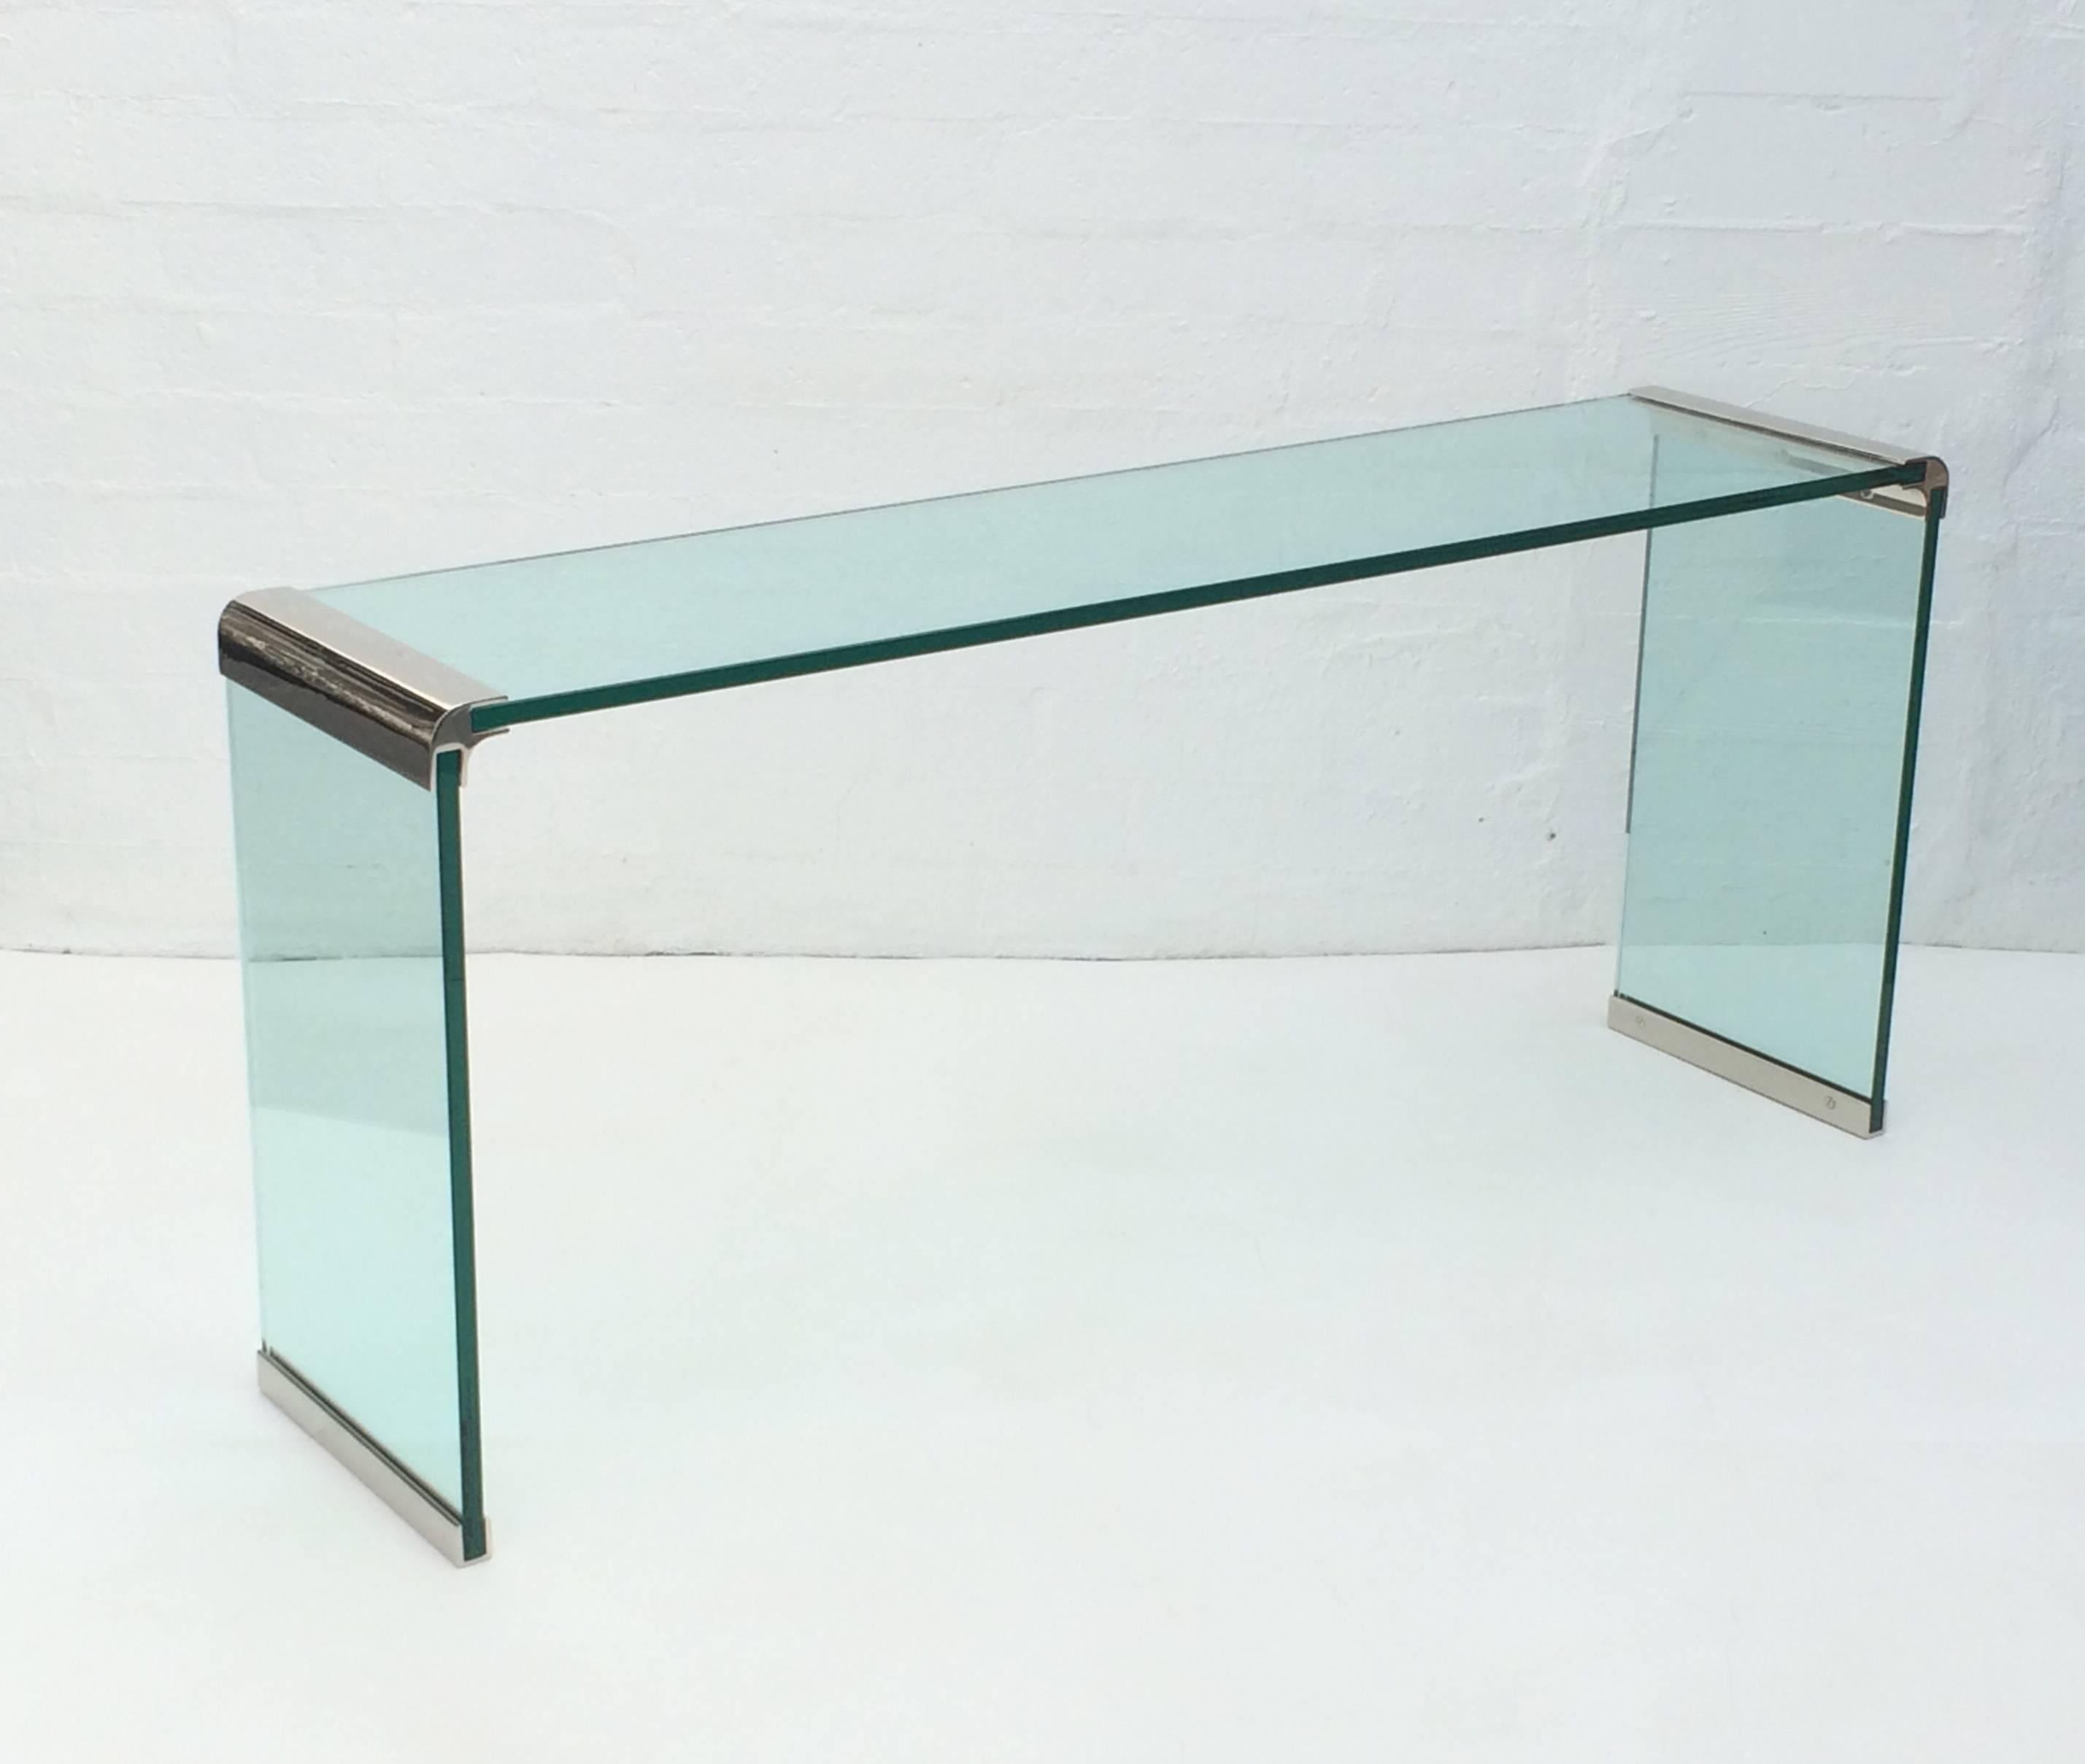 An elegant waterfall console table designed by Leon Rosen for Pace Collection in the 1970s.
Newly re-plated in nickel and all new 3/4